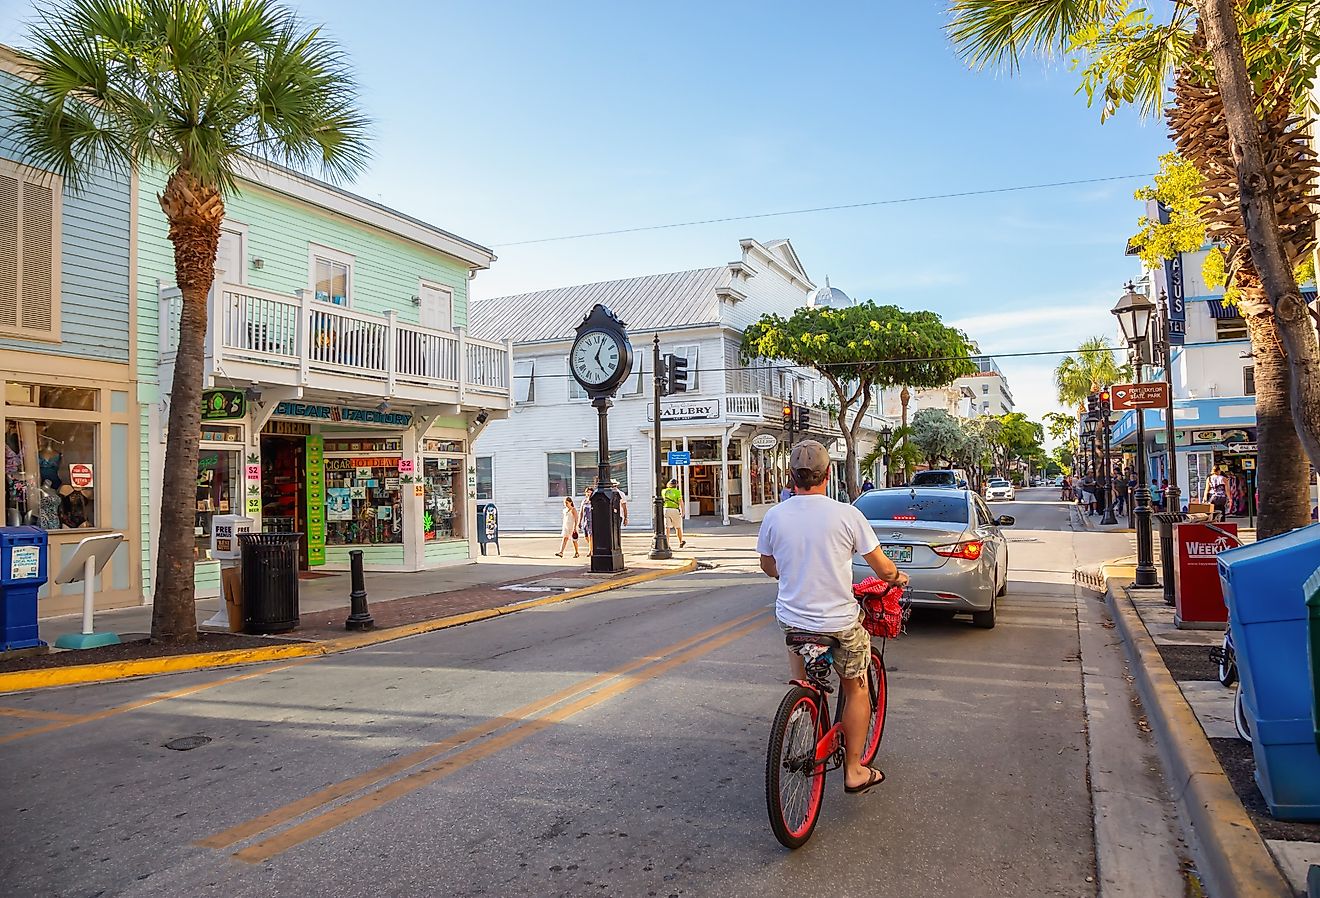 Street view of the Main Strip in Key West, Florida. Image credit EB Adventure Photography via Shutterstock